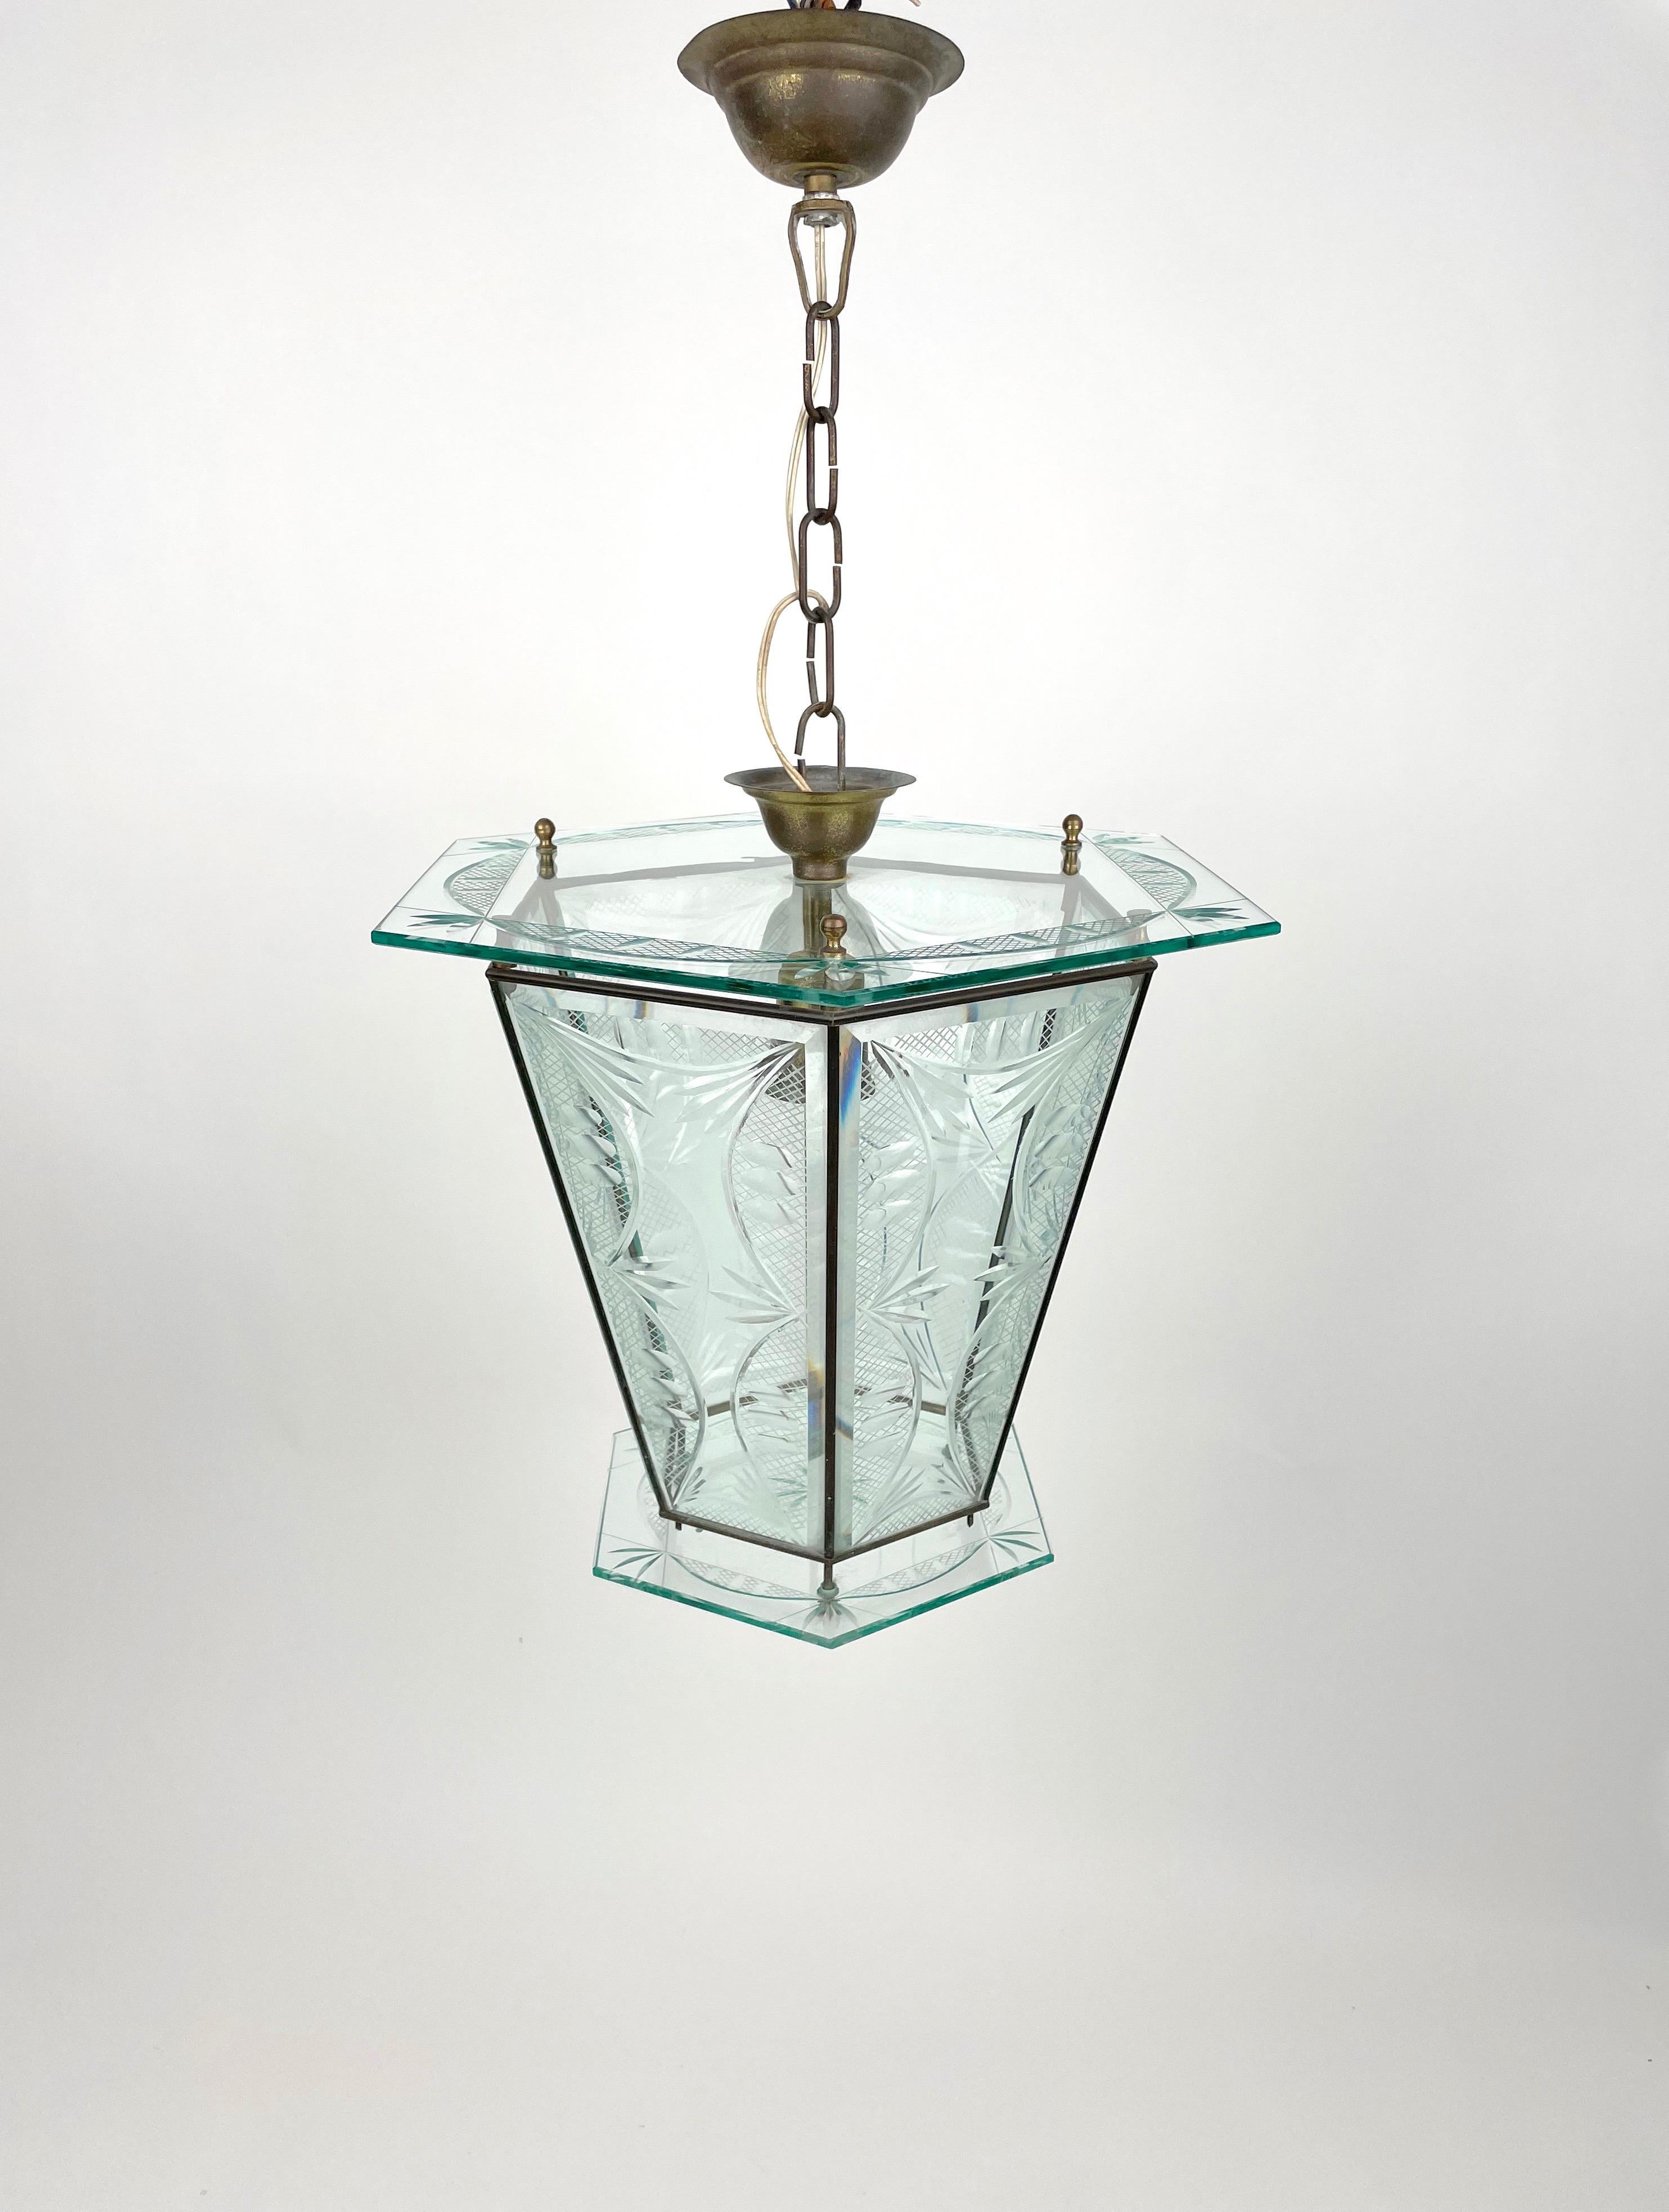 1950s Chandelier lantern in glass with brass structure and chain attributed to the Italian designer Pietro Chiesa for Fontana Arte. 

Measures: Height with chain: 66 cm. 
Height without chain: 33 cm.